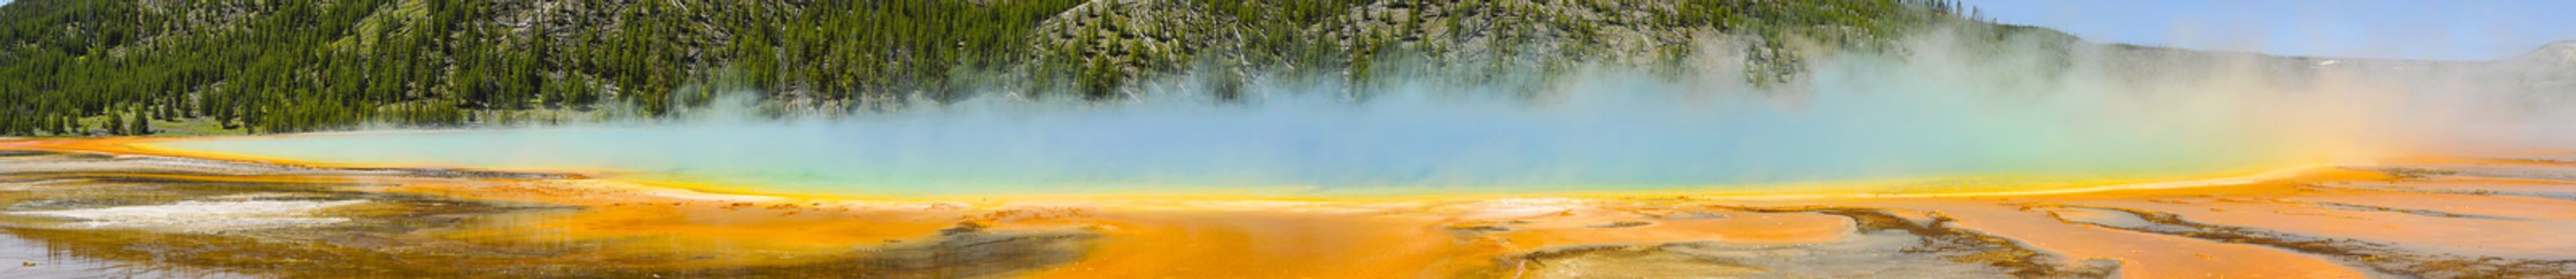 Grand Prismatic Spring panorama in Midway Geyser Basin, Yellowstone National Park, Wyoming